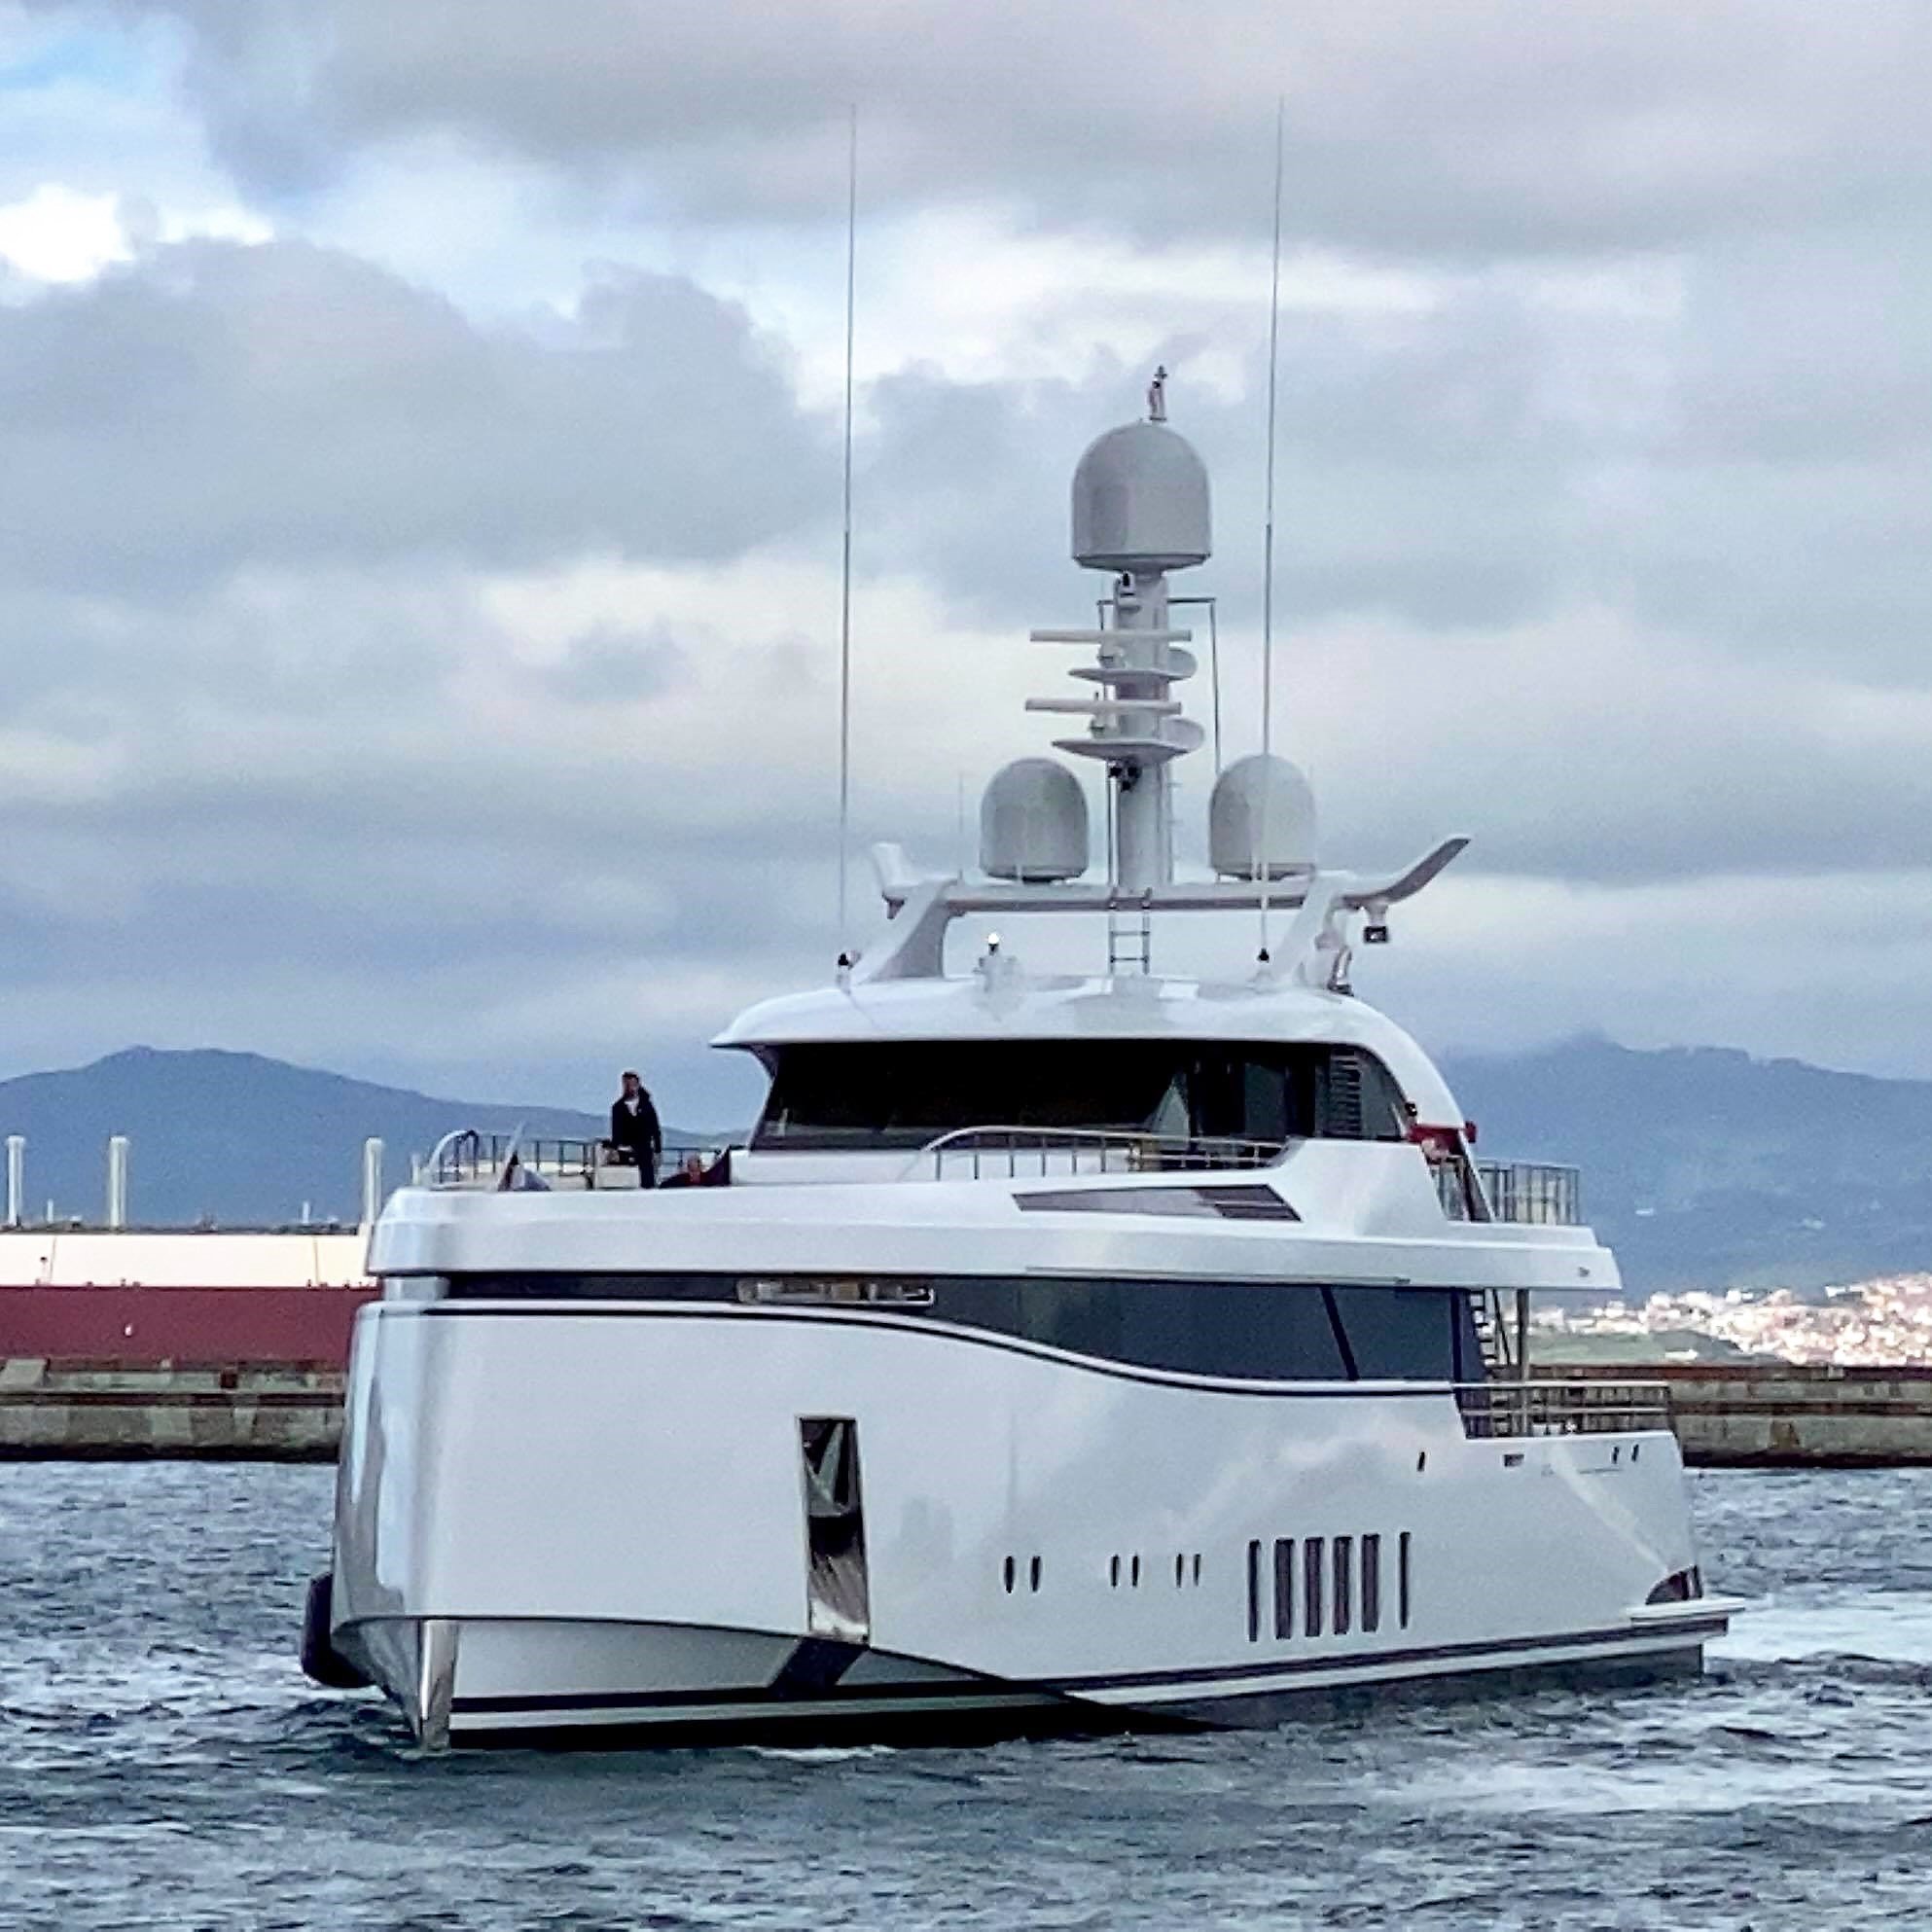 yate Totally Nuts - Feadship - 2021 - Sarkis Izrmirlian